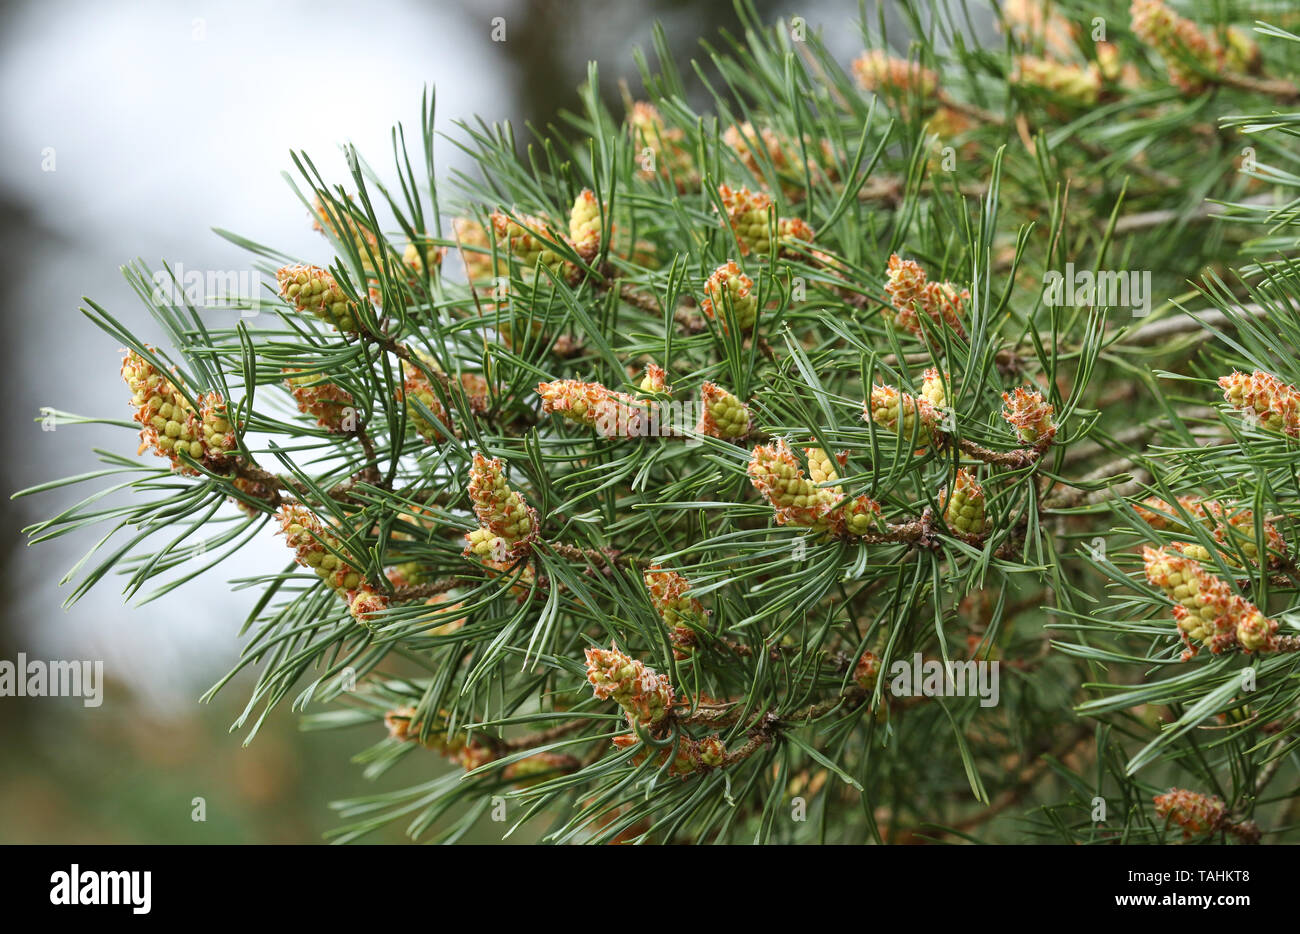 A branch of a Black Pine, Pinus nigra, tree growing in woodland in the UK. Stock Photo